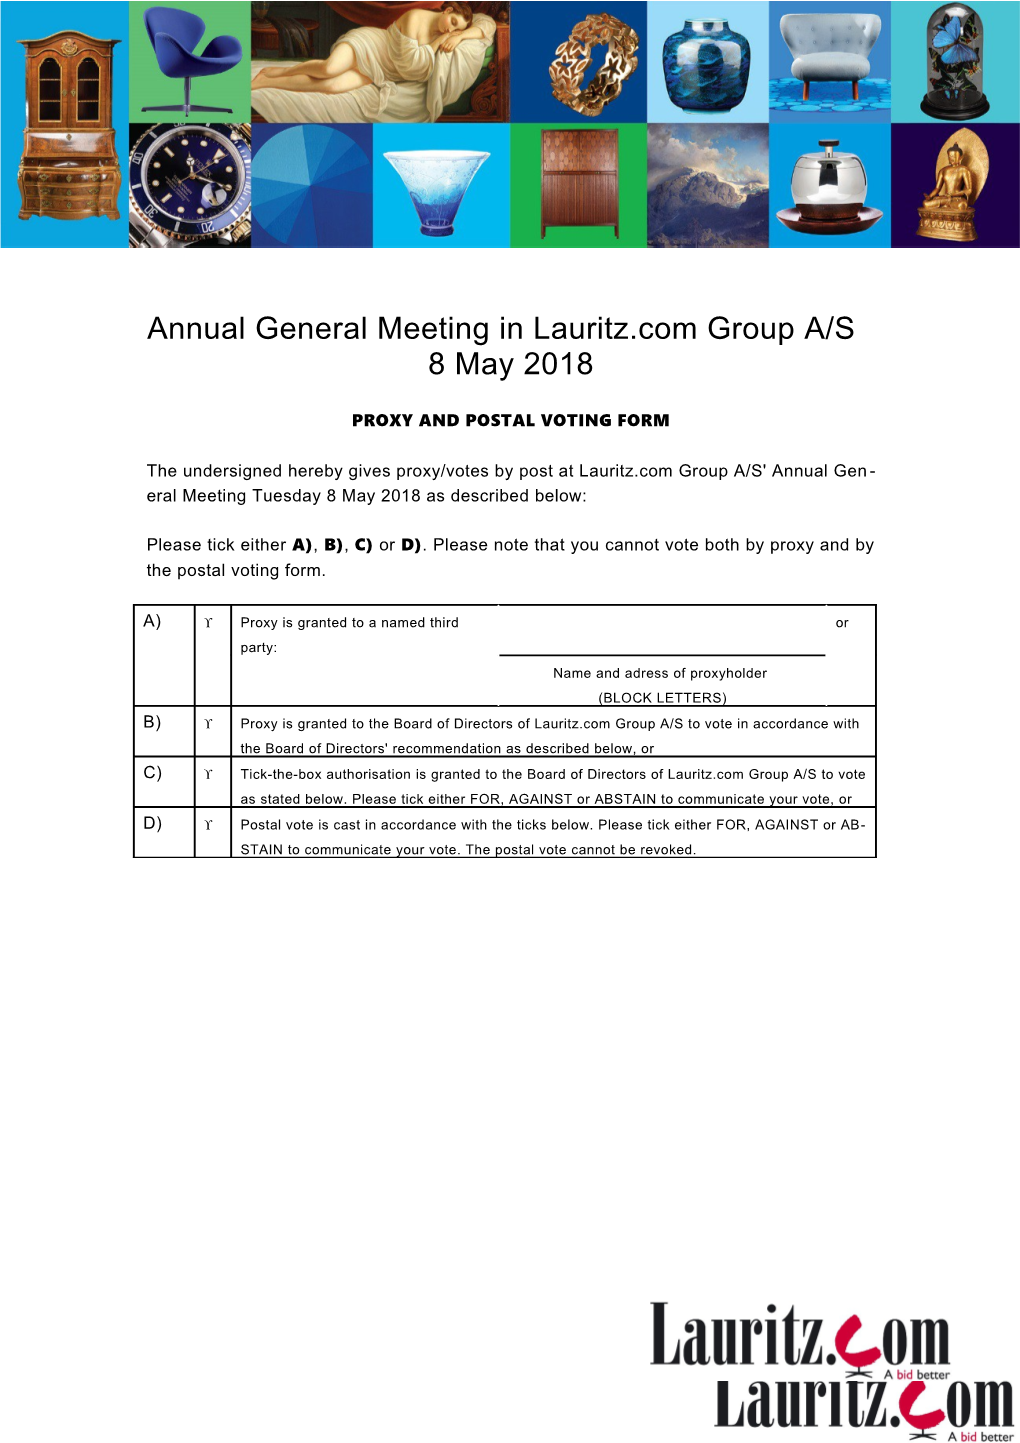 Annual General Meeting in Lauritz.Com Group A/S